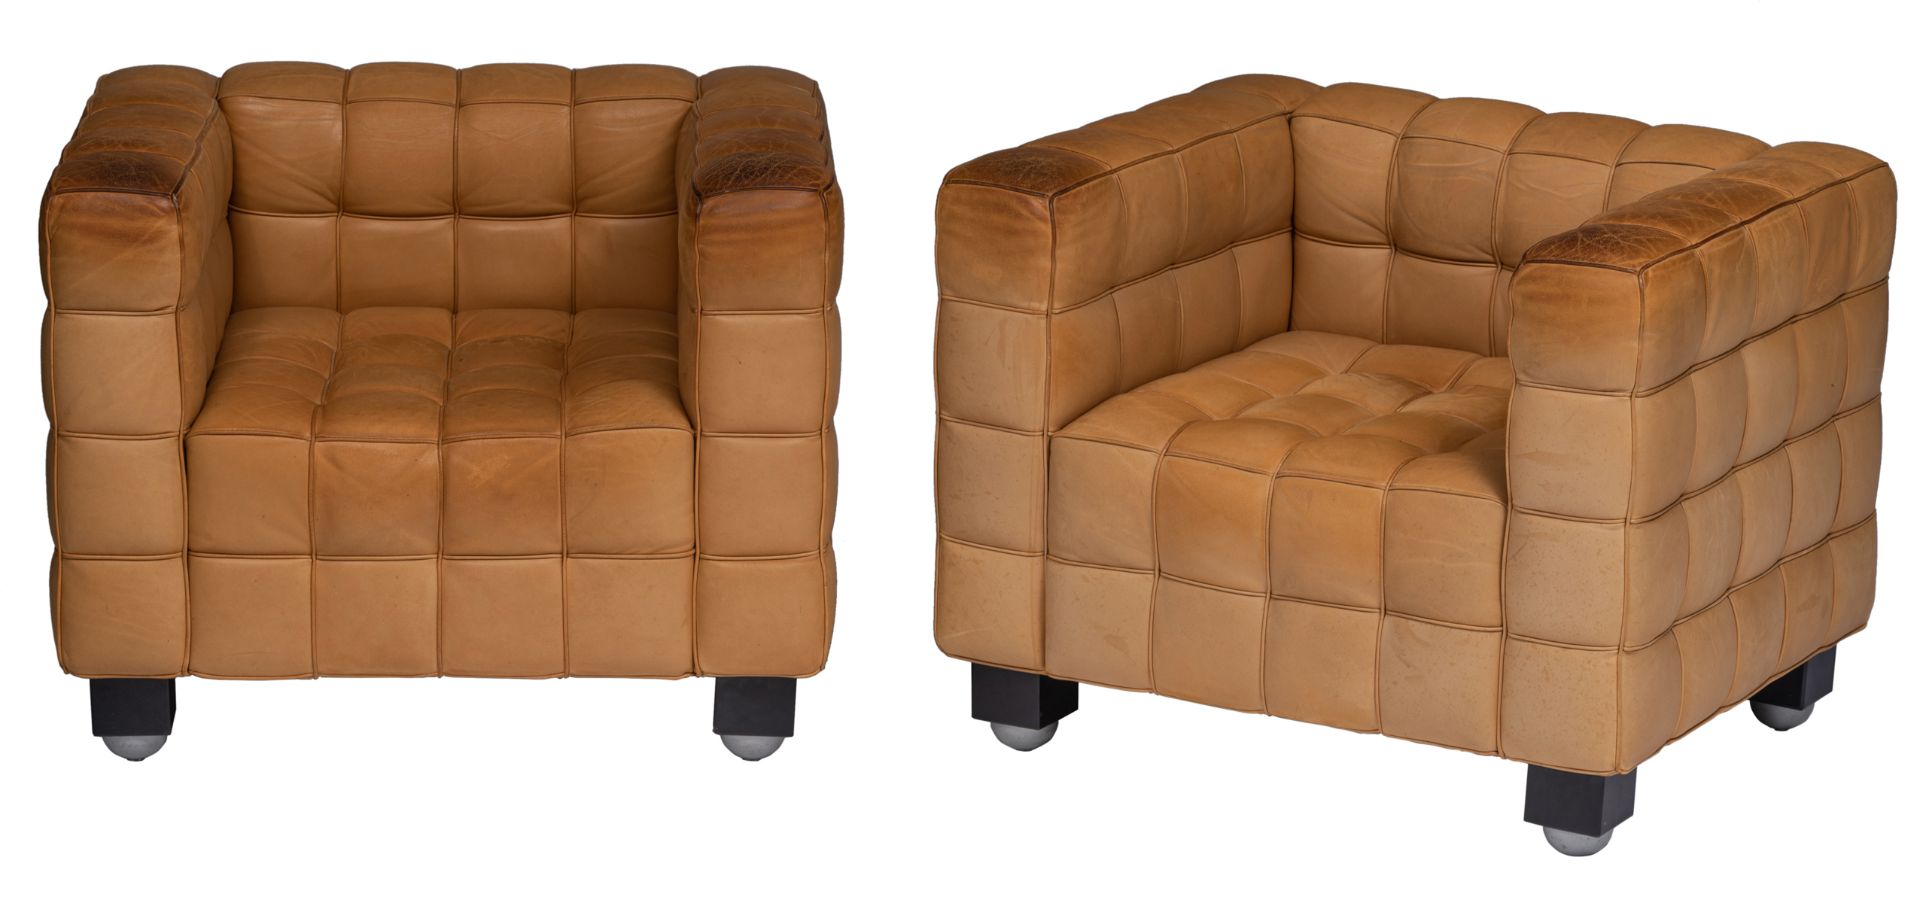 A pair of leather upholstered Kubus Armchairs, design by Josef Hoffmann for Wittmann Austria, the '8